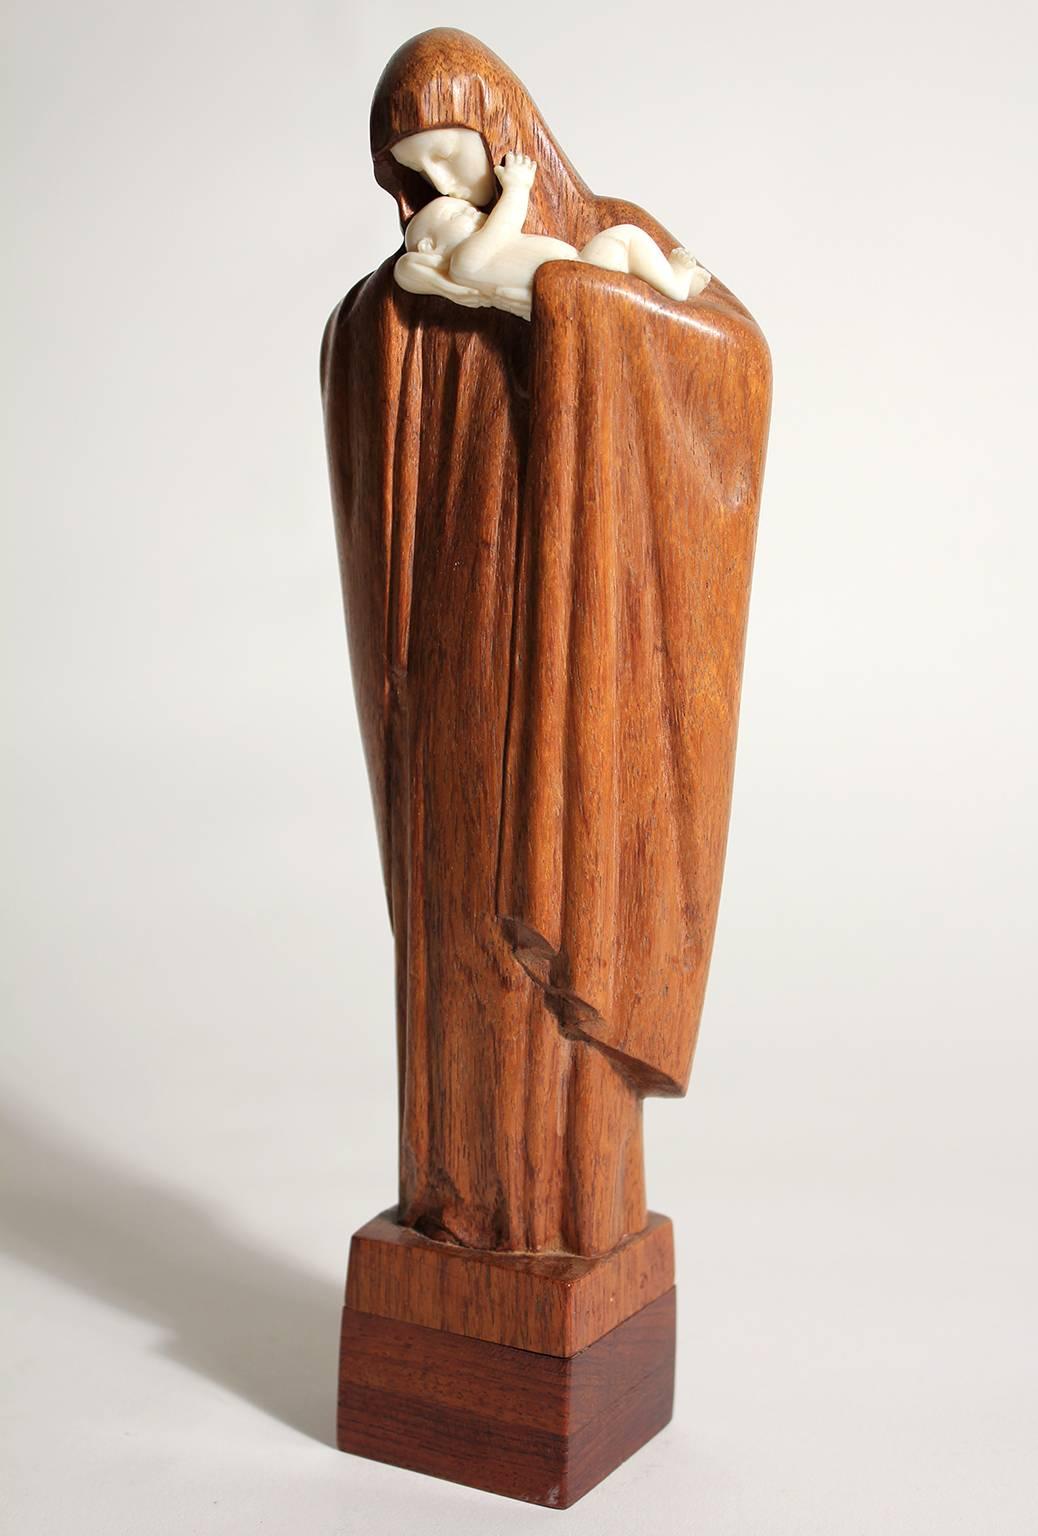 Exquisite French art deco sculpture by listed artist Lucienne Heuvelmans. The sculpture is carved out of wood and chryselephantine. Signed by the artist on the bottom. Excellent quality and detail.